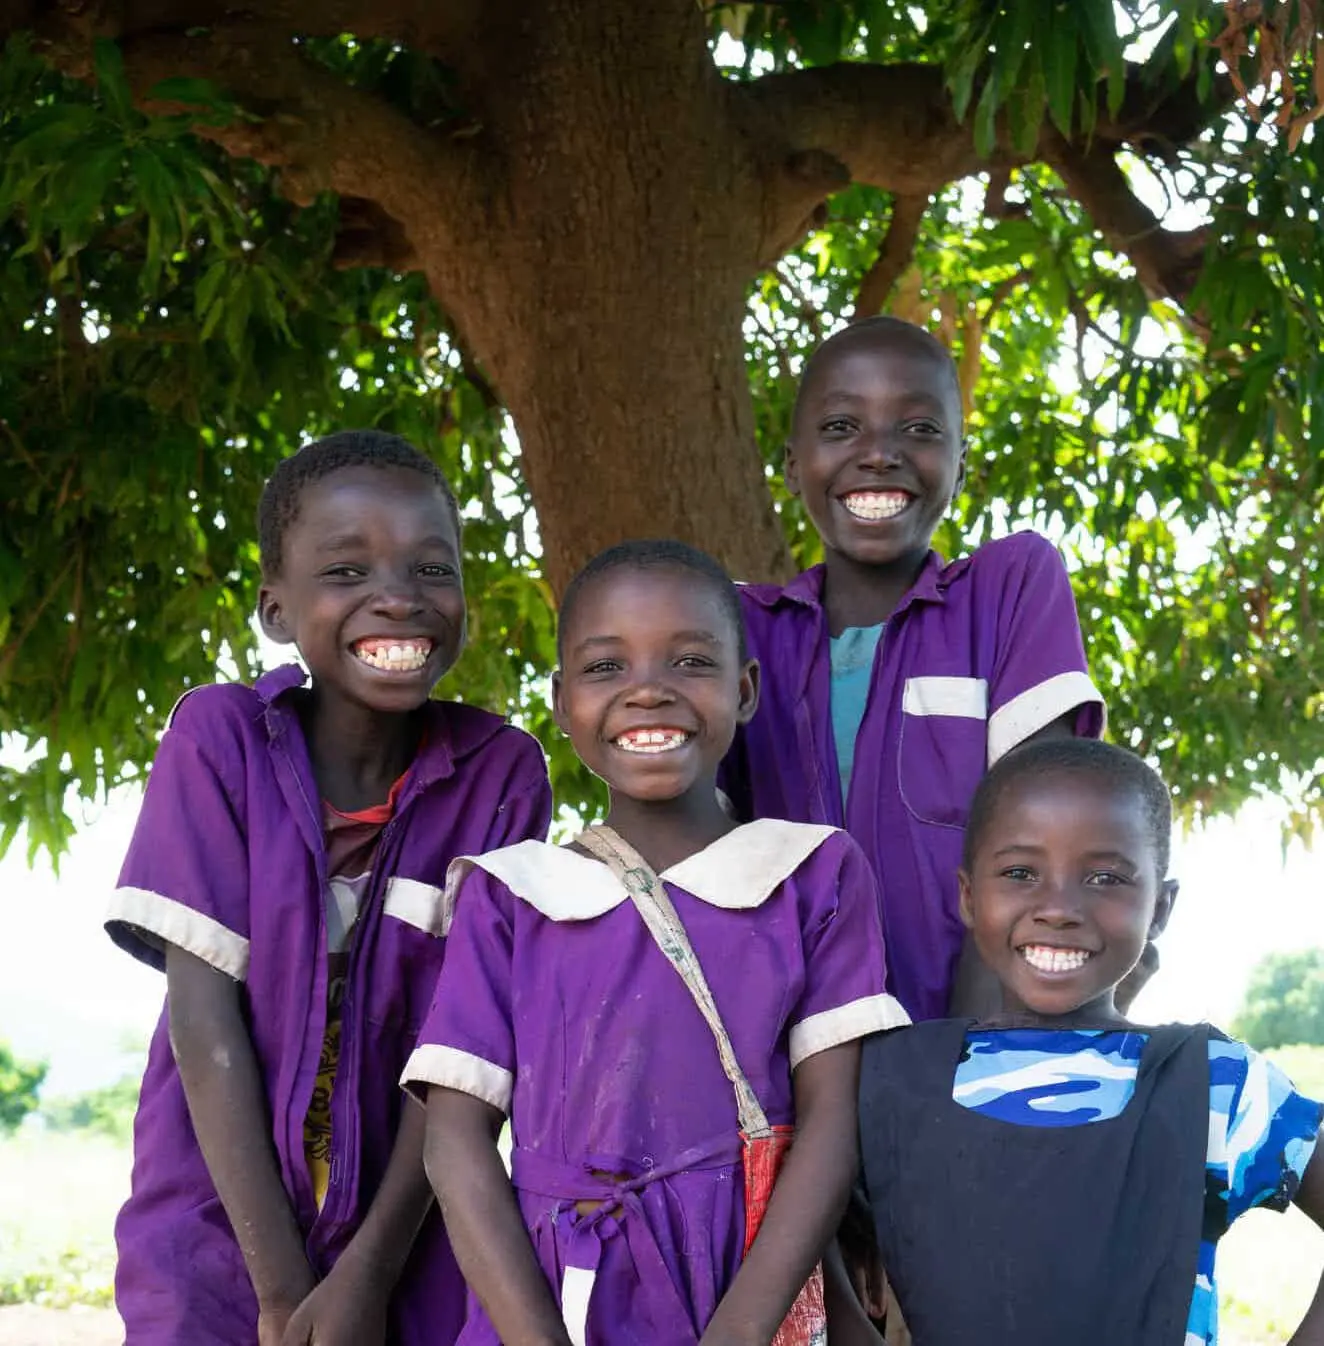 Yohane, 13, Yesaya, 10, Salayi, 8 and Luth, 6 in their school uniforms that their parents could afford with the money they received from Concern Worldwide, Manjolo Village, Nsanje District.